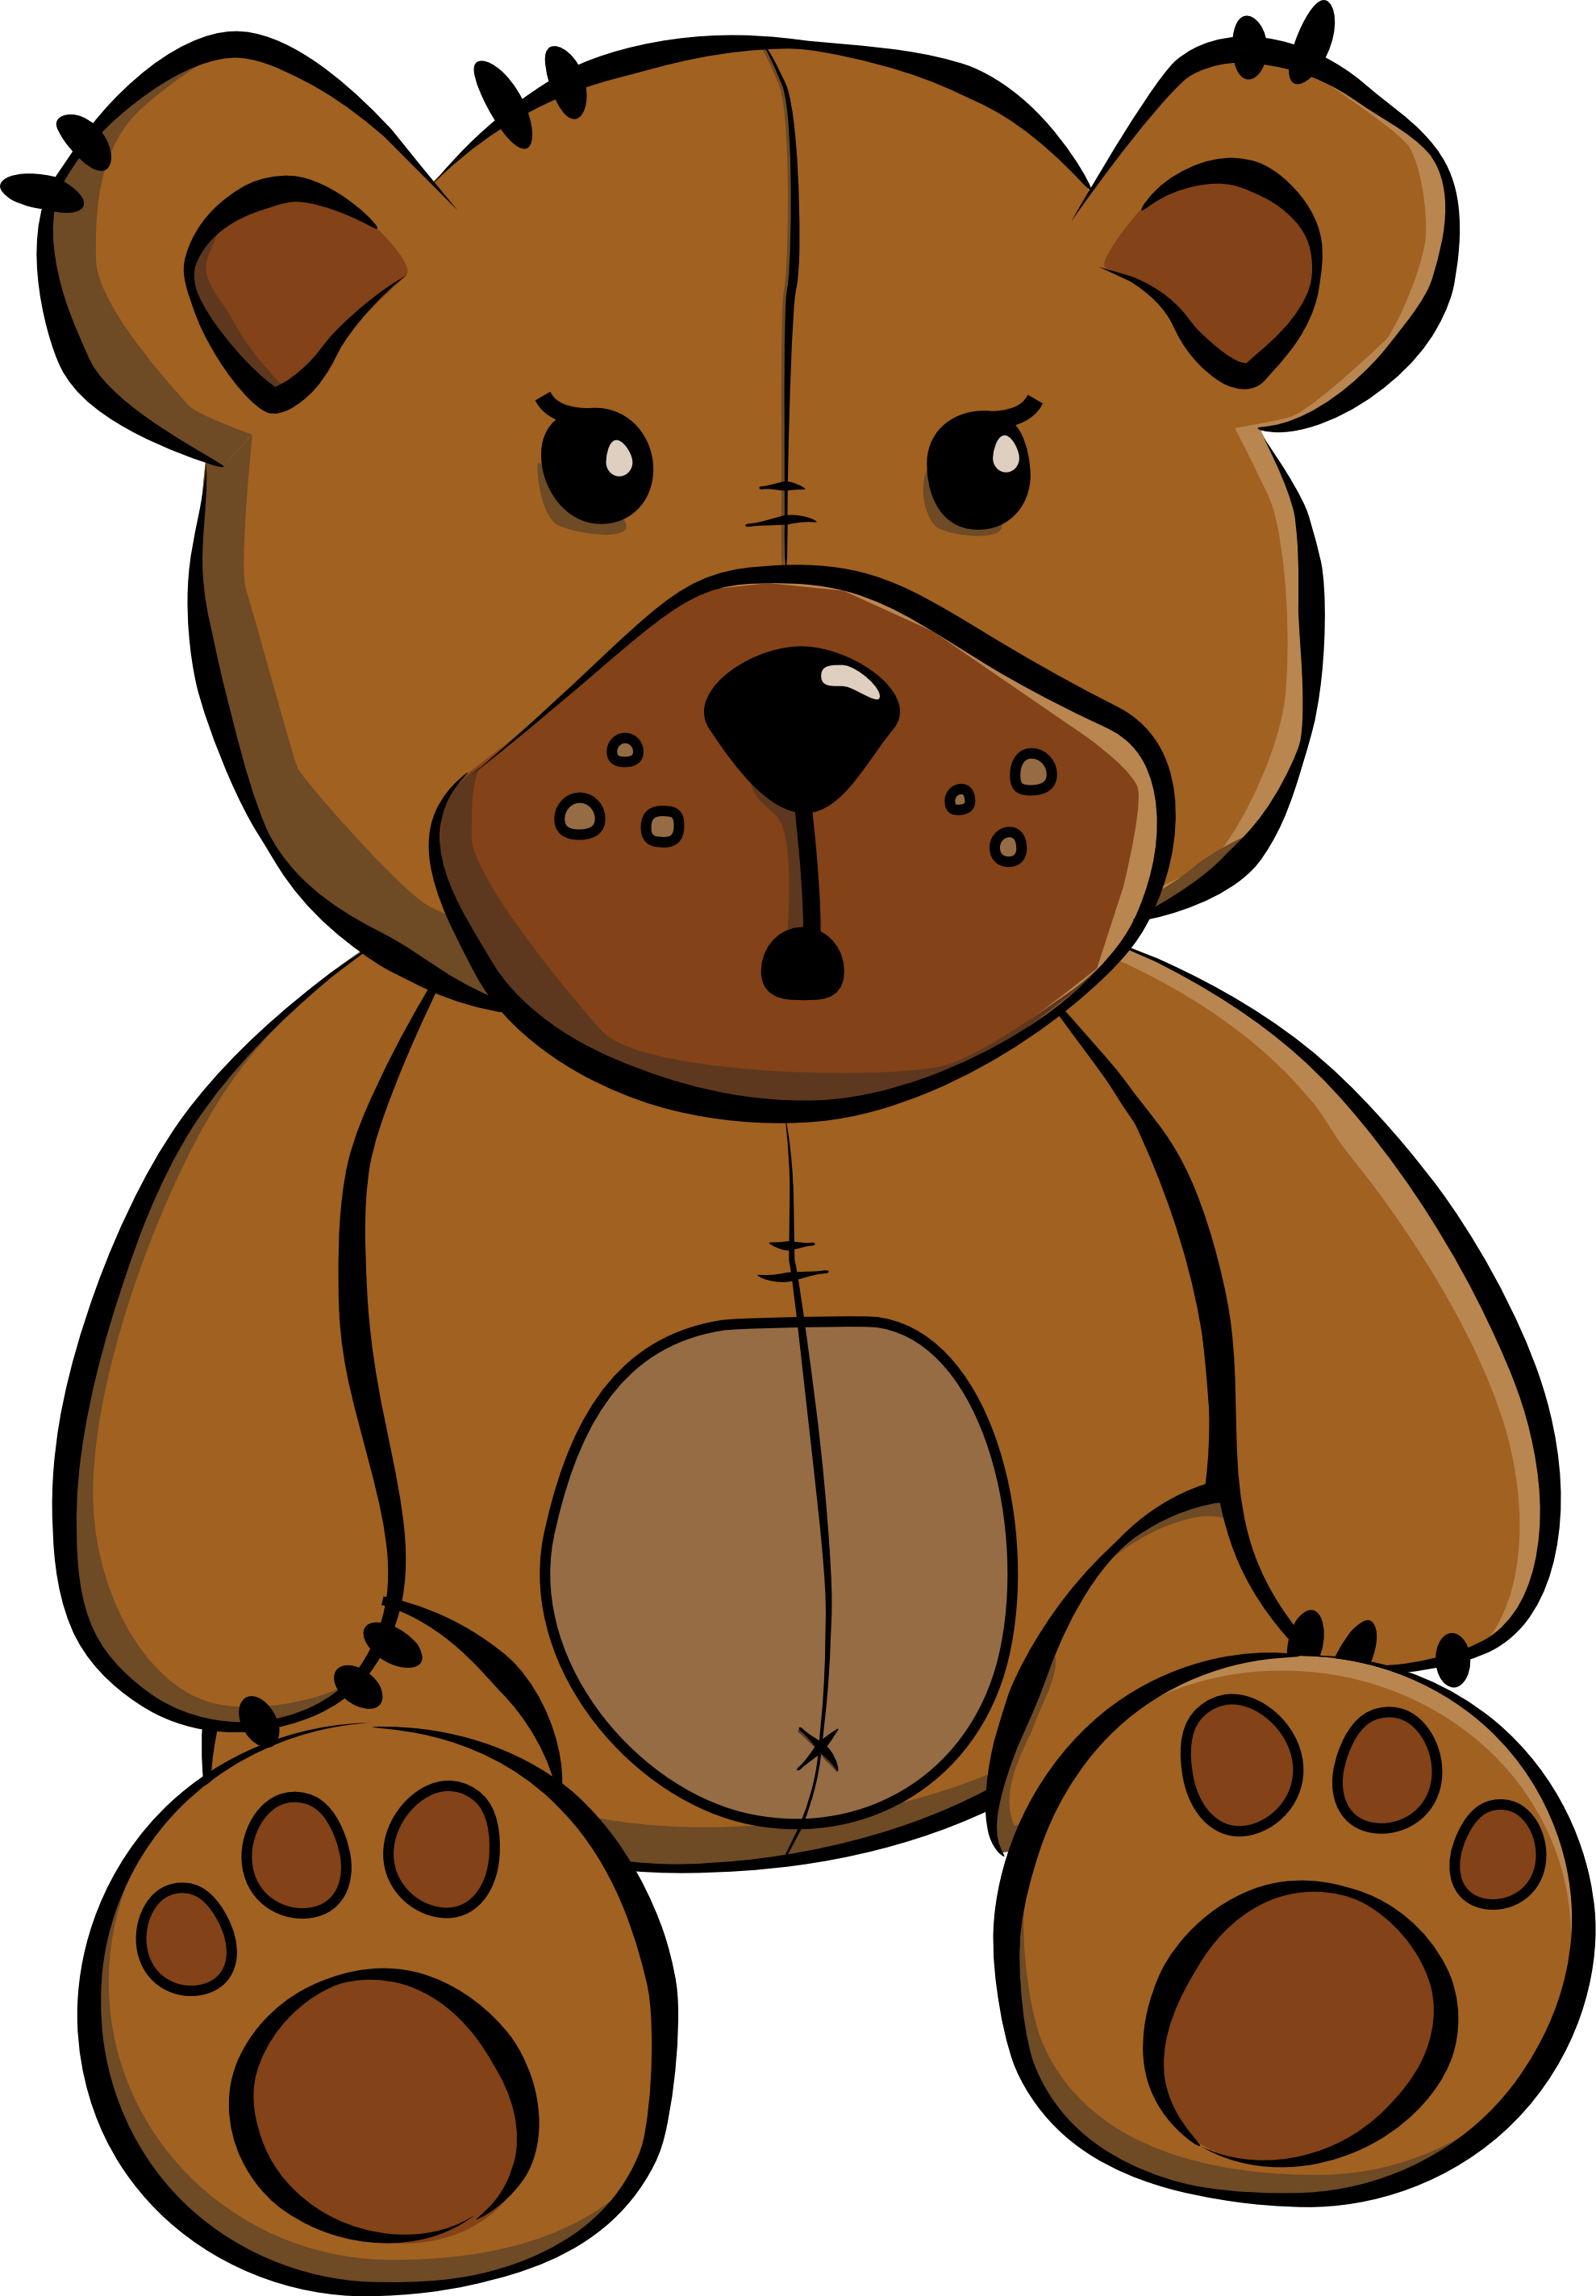 Bears clipart transparent. Bear png free images